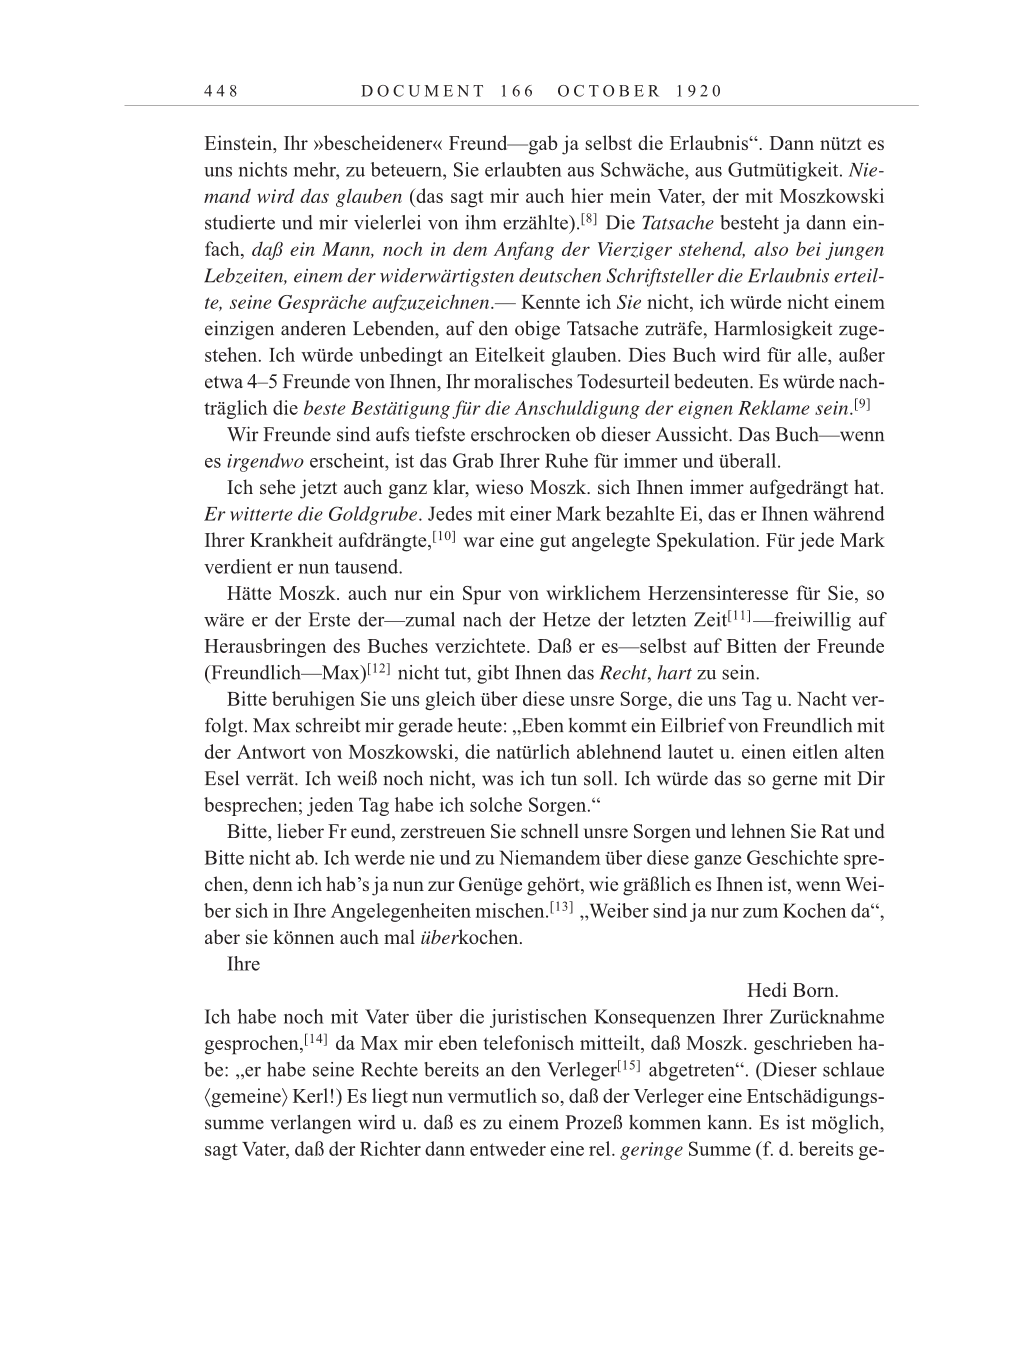 Volume 10: The Berlin Years: Correspondence May-December 1920 / Supplementary Correspondence 1909-1920 page 448